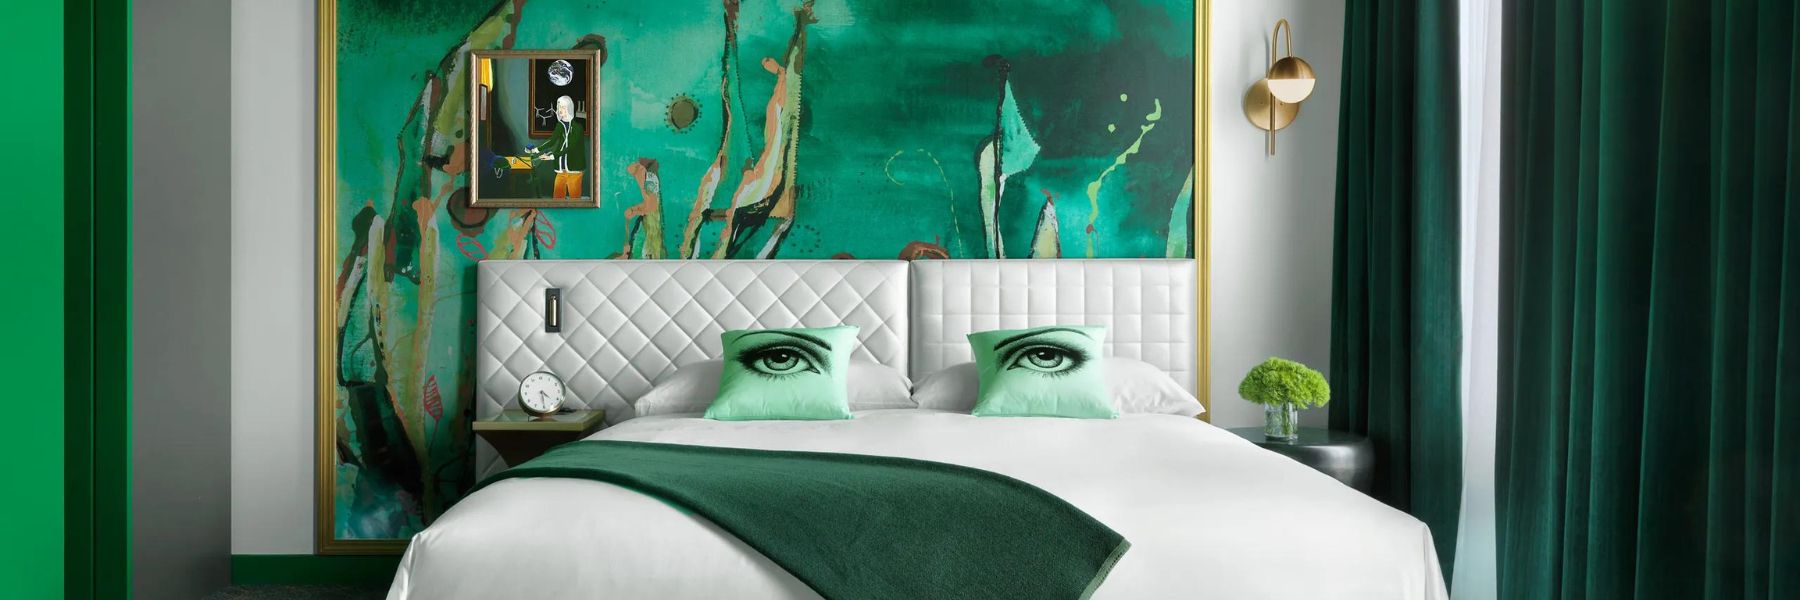 Each room at the Angad Arts Hotel features a different color such as green.